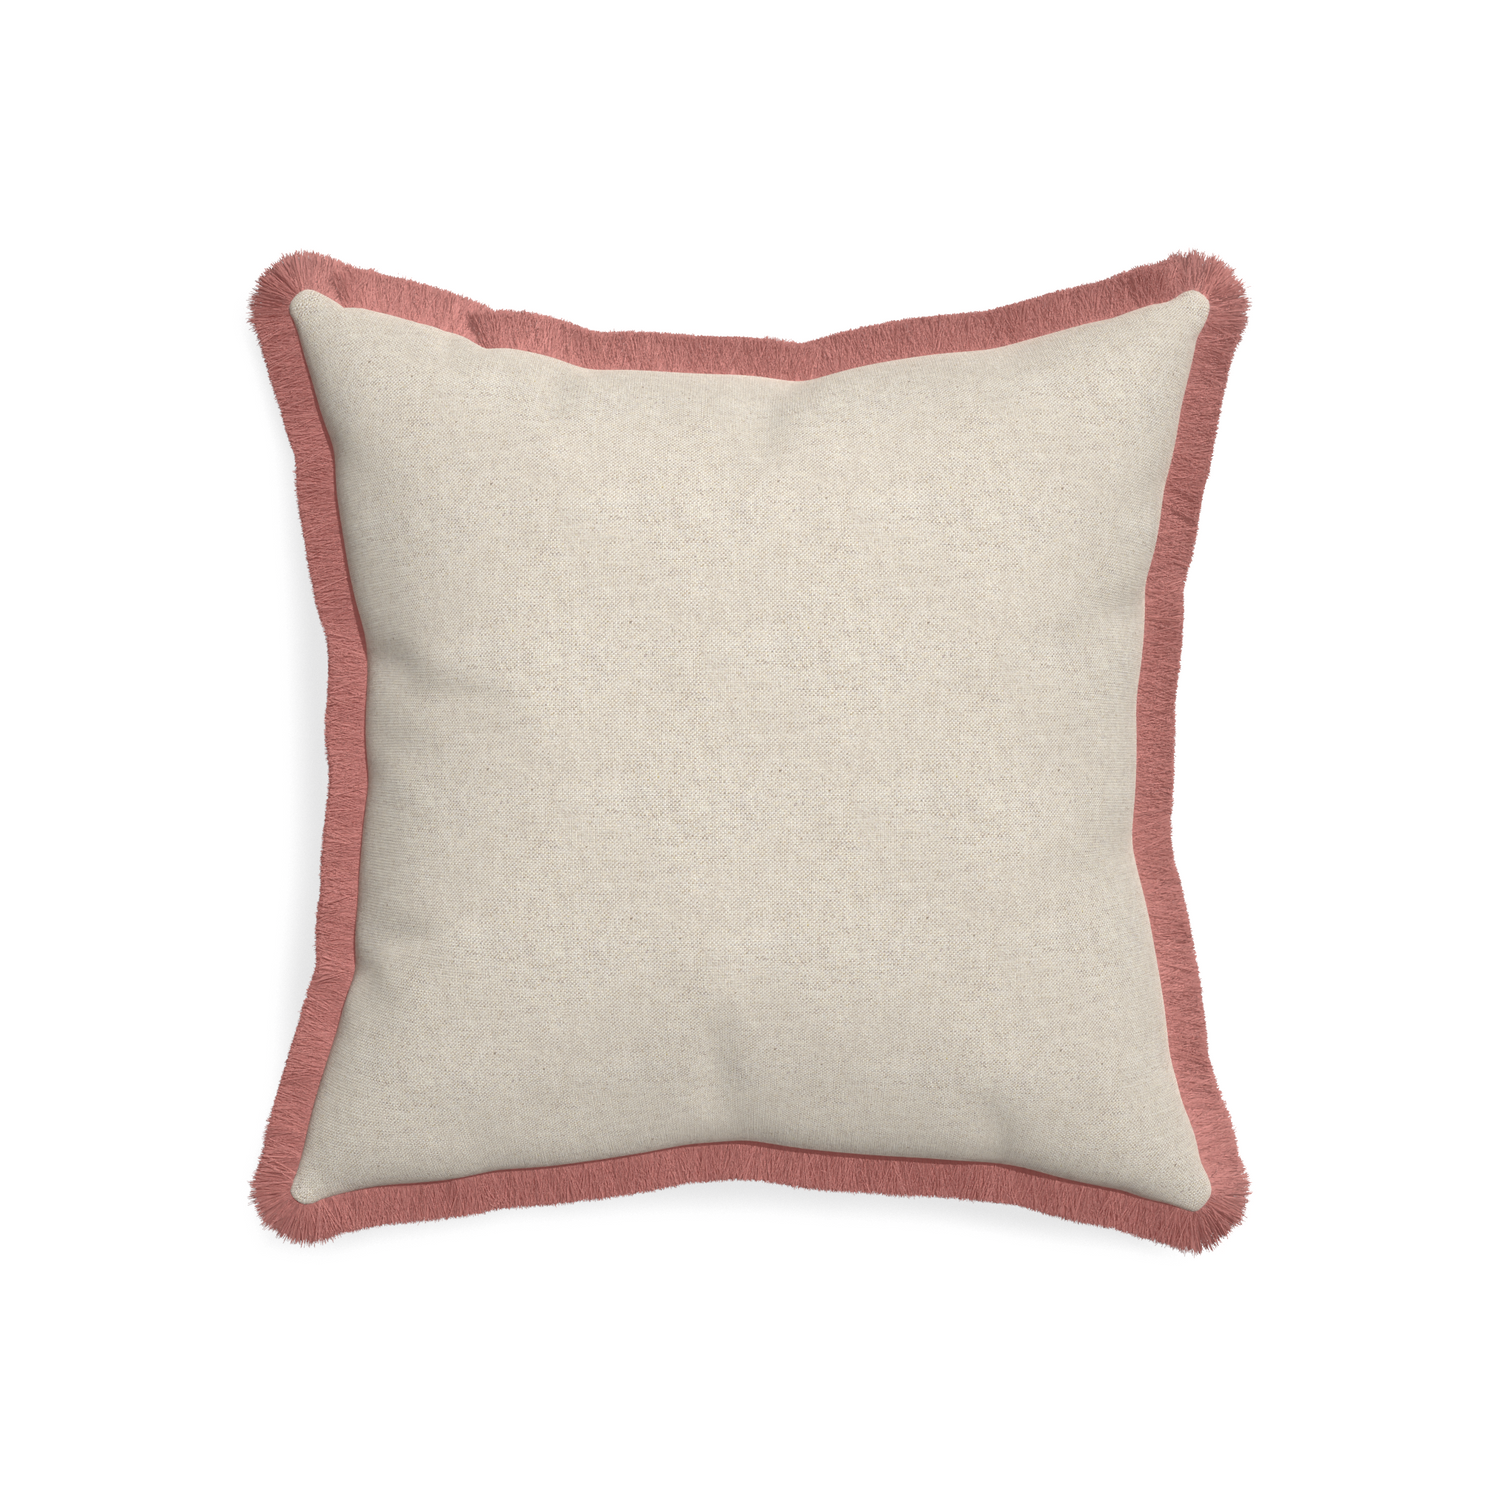 20-square oat custom pillow with d fringe on white background